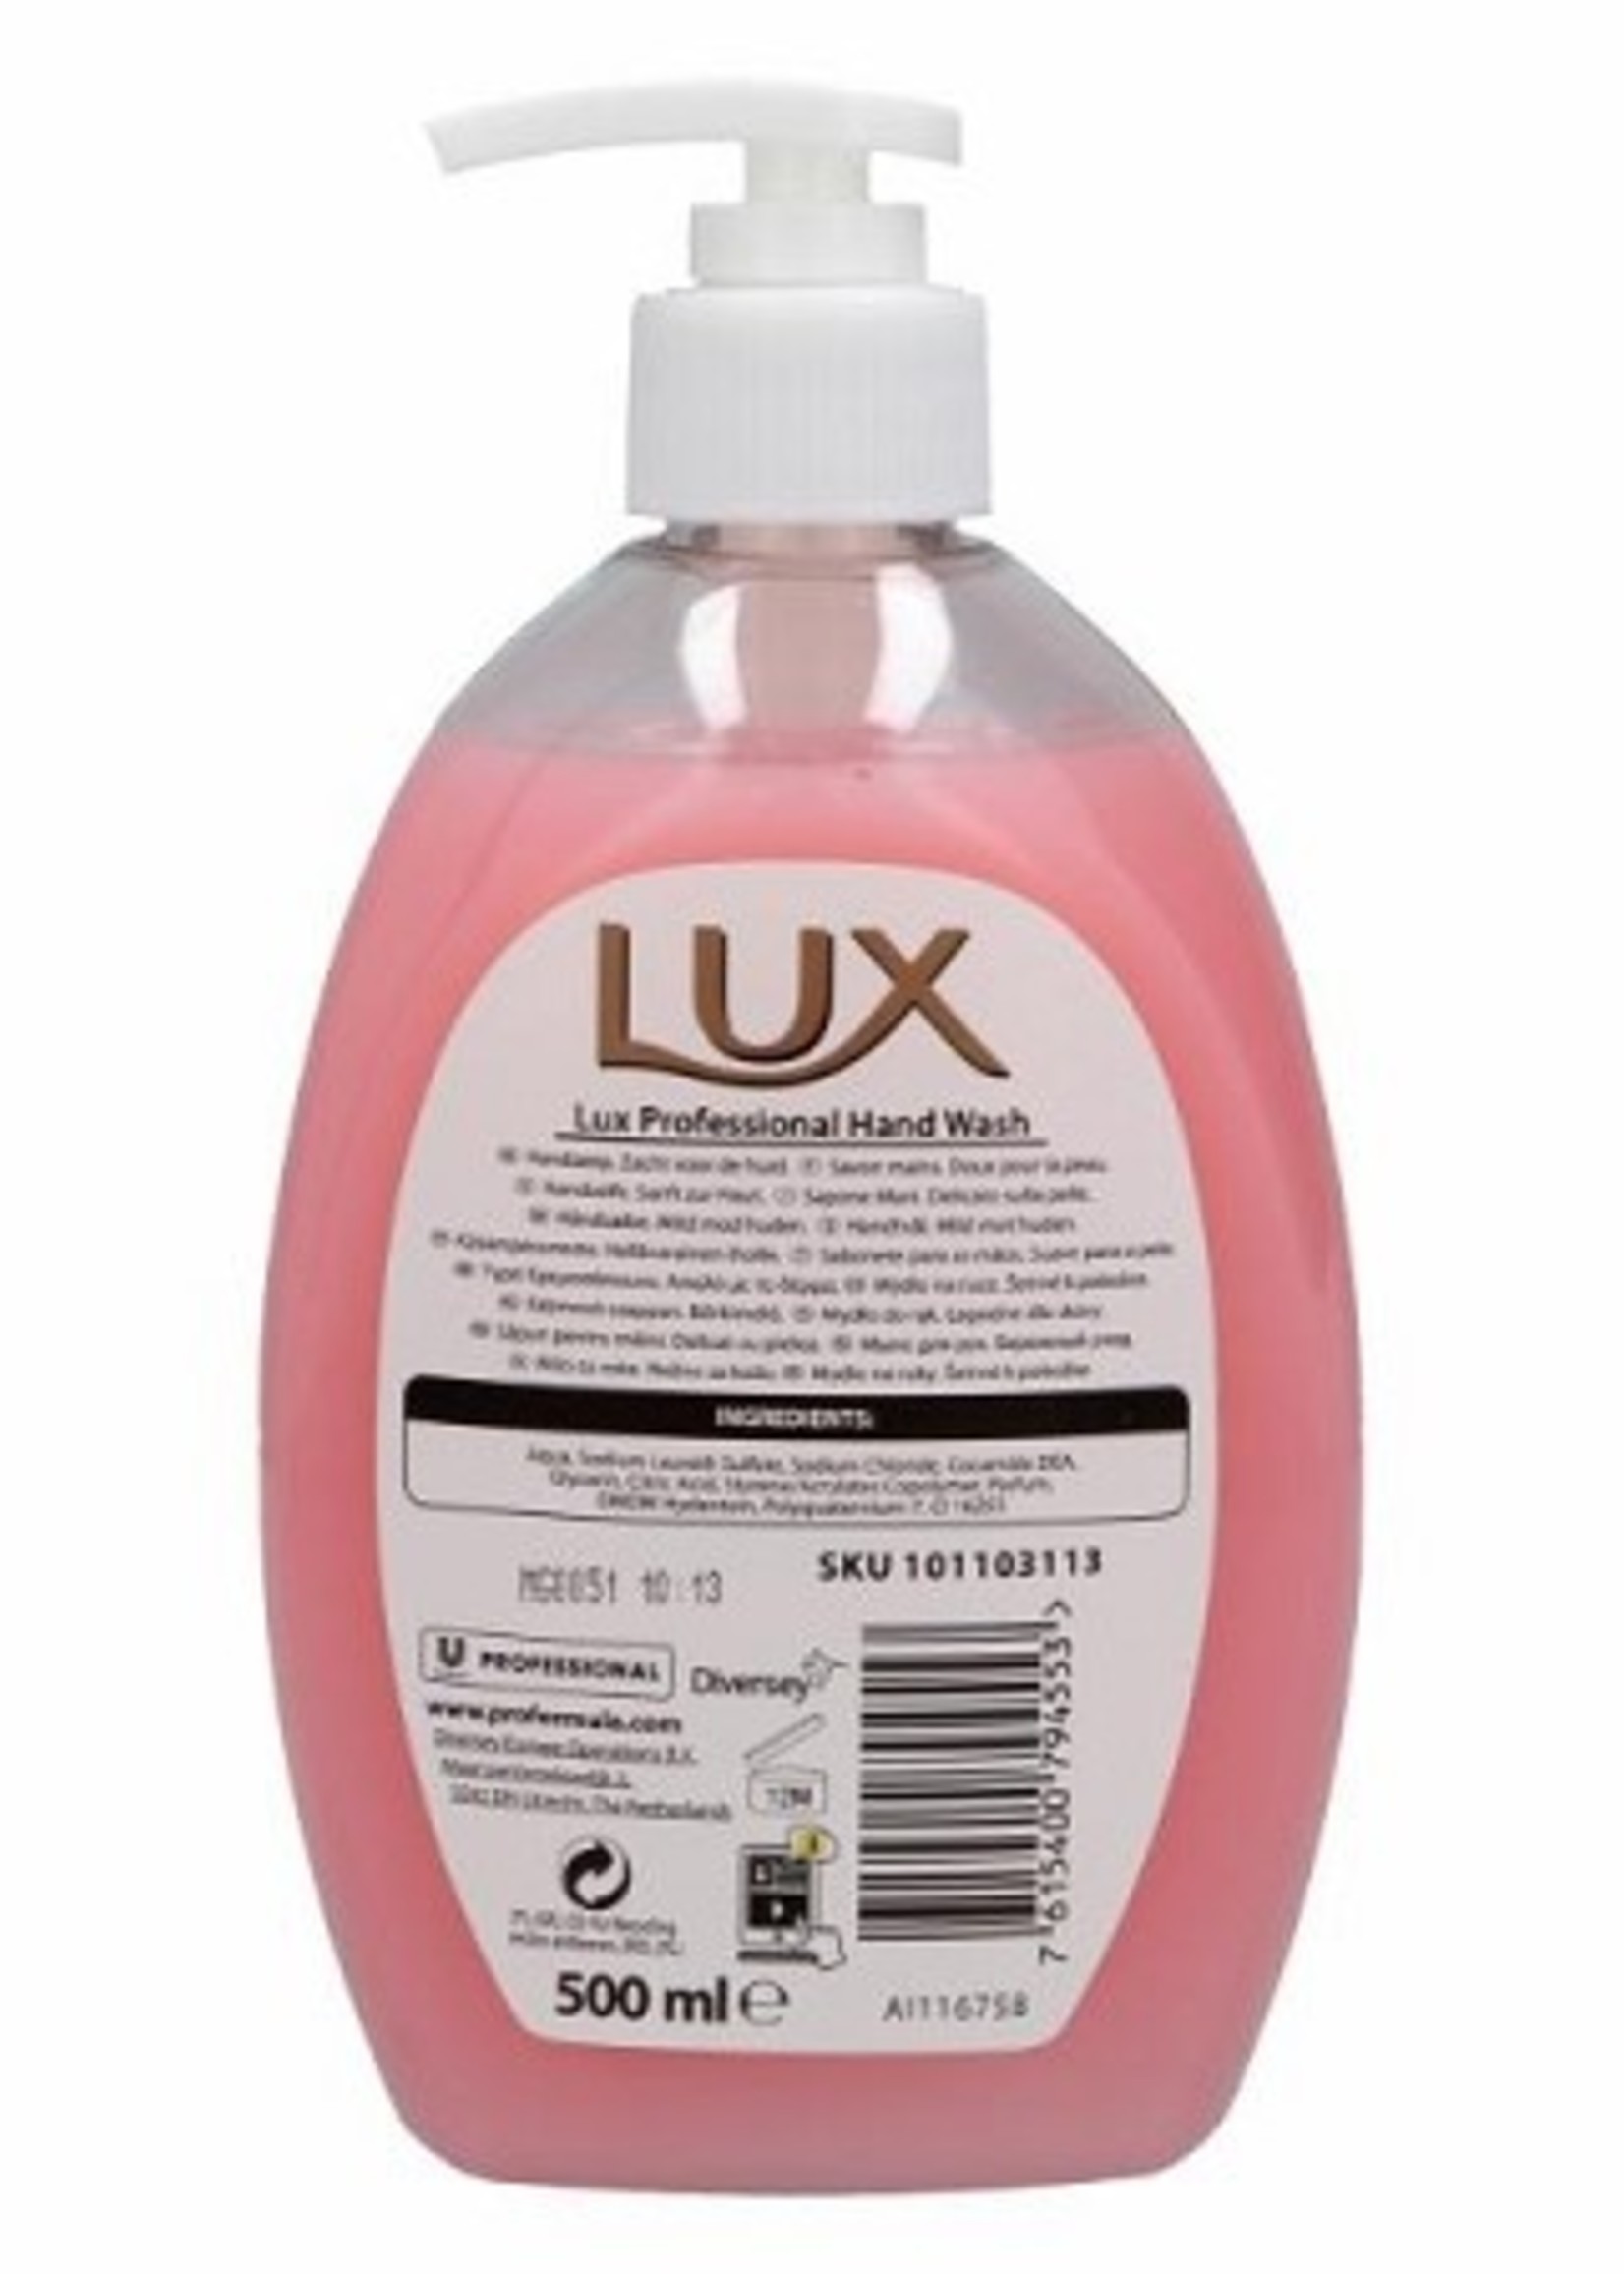 Lux Hand wash Blooming flowers 500ml